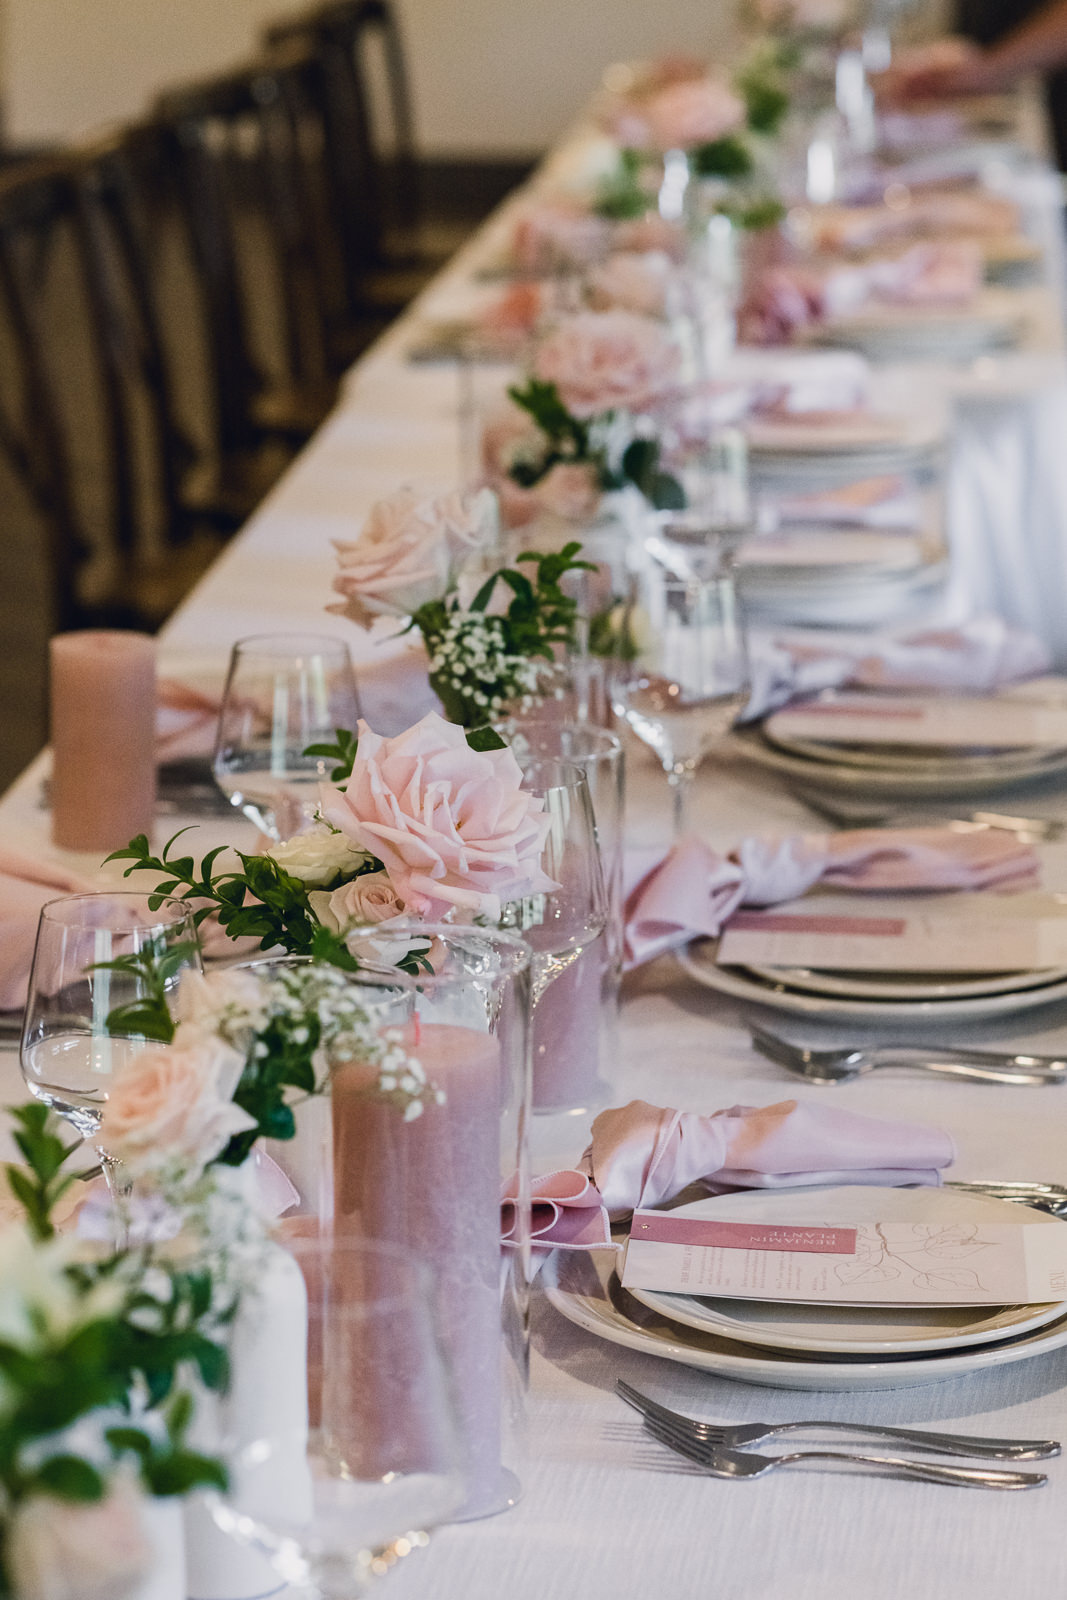 pink and white flowers in bud vases used as centerpieces on a wedding reception table